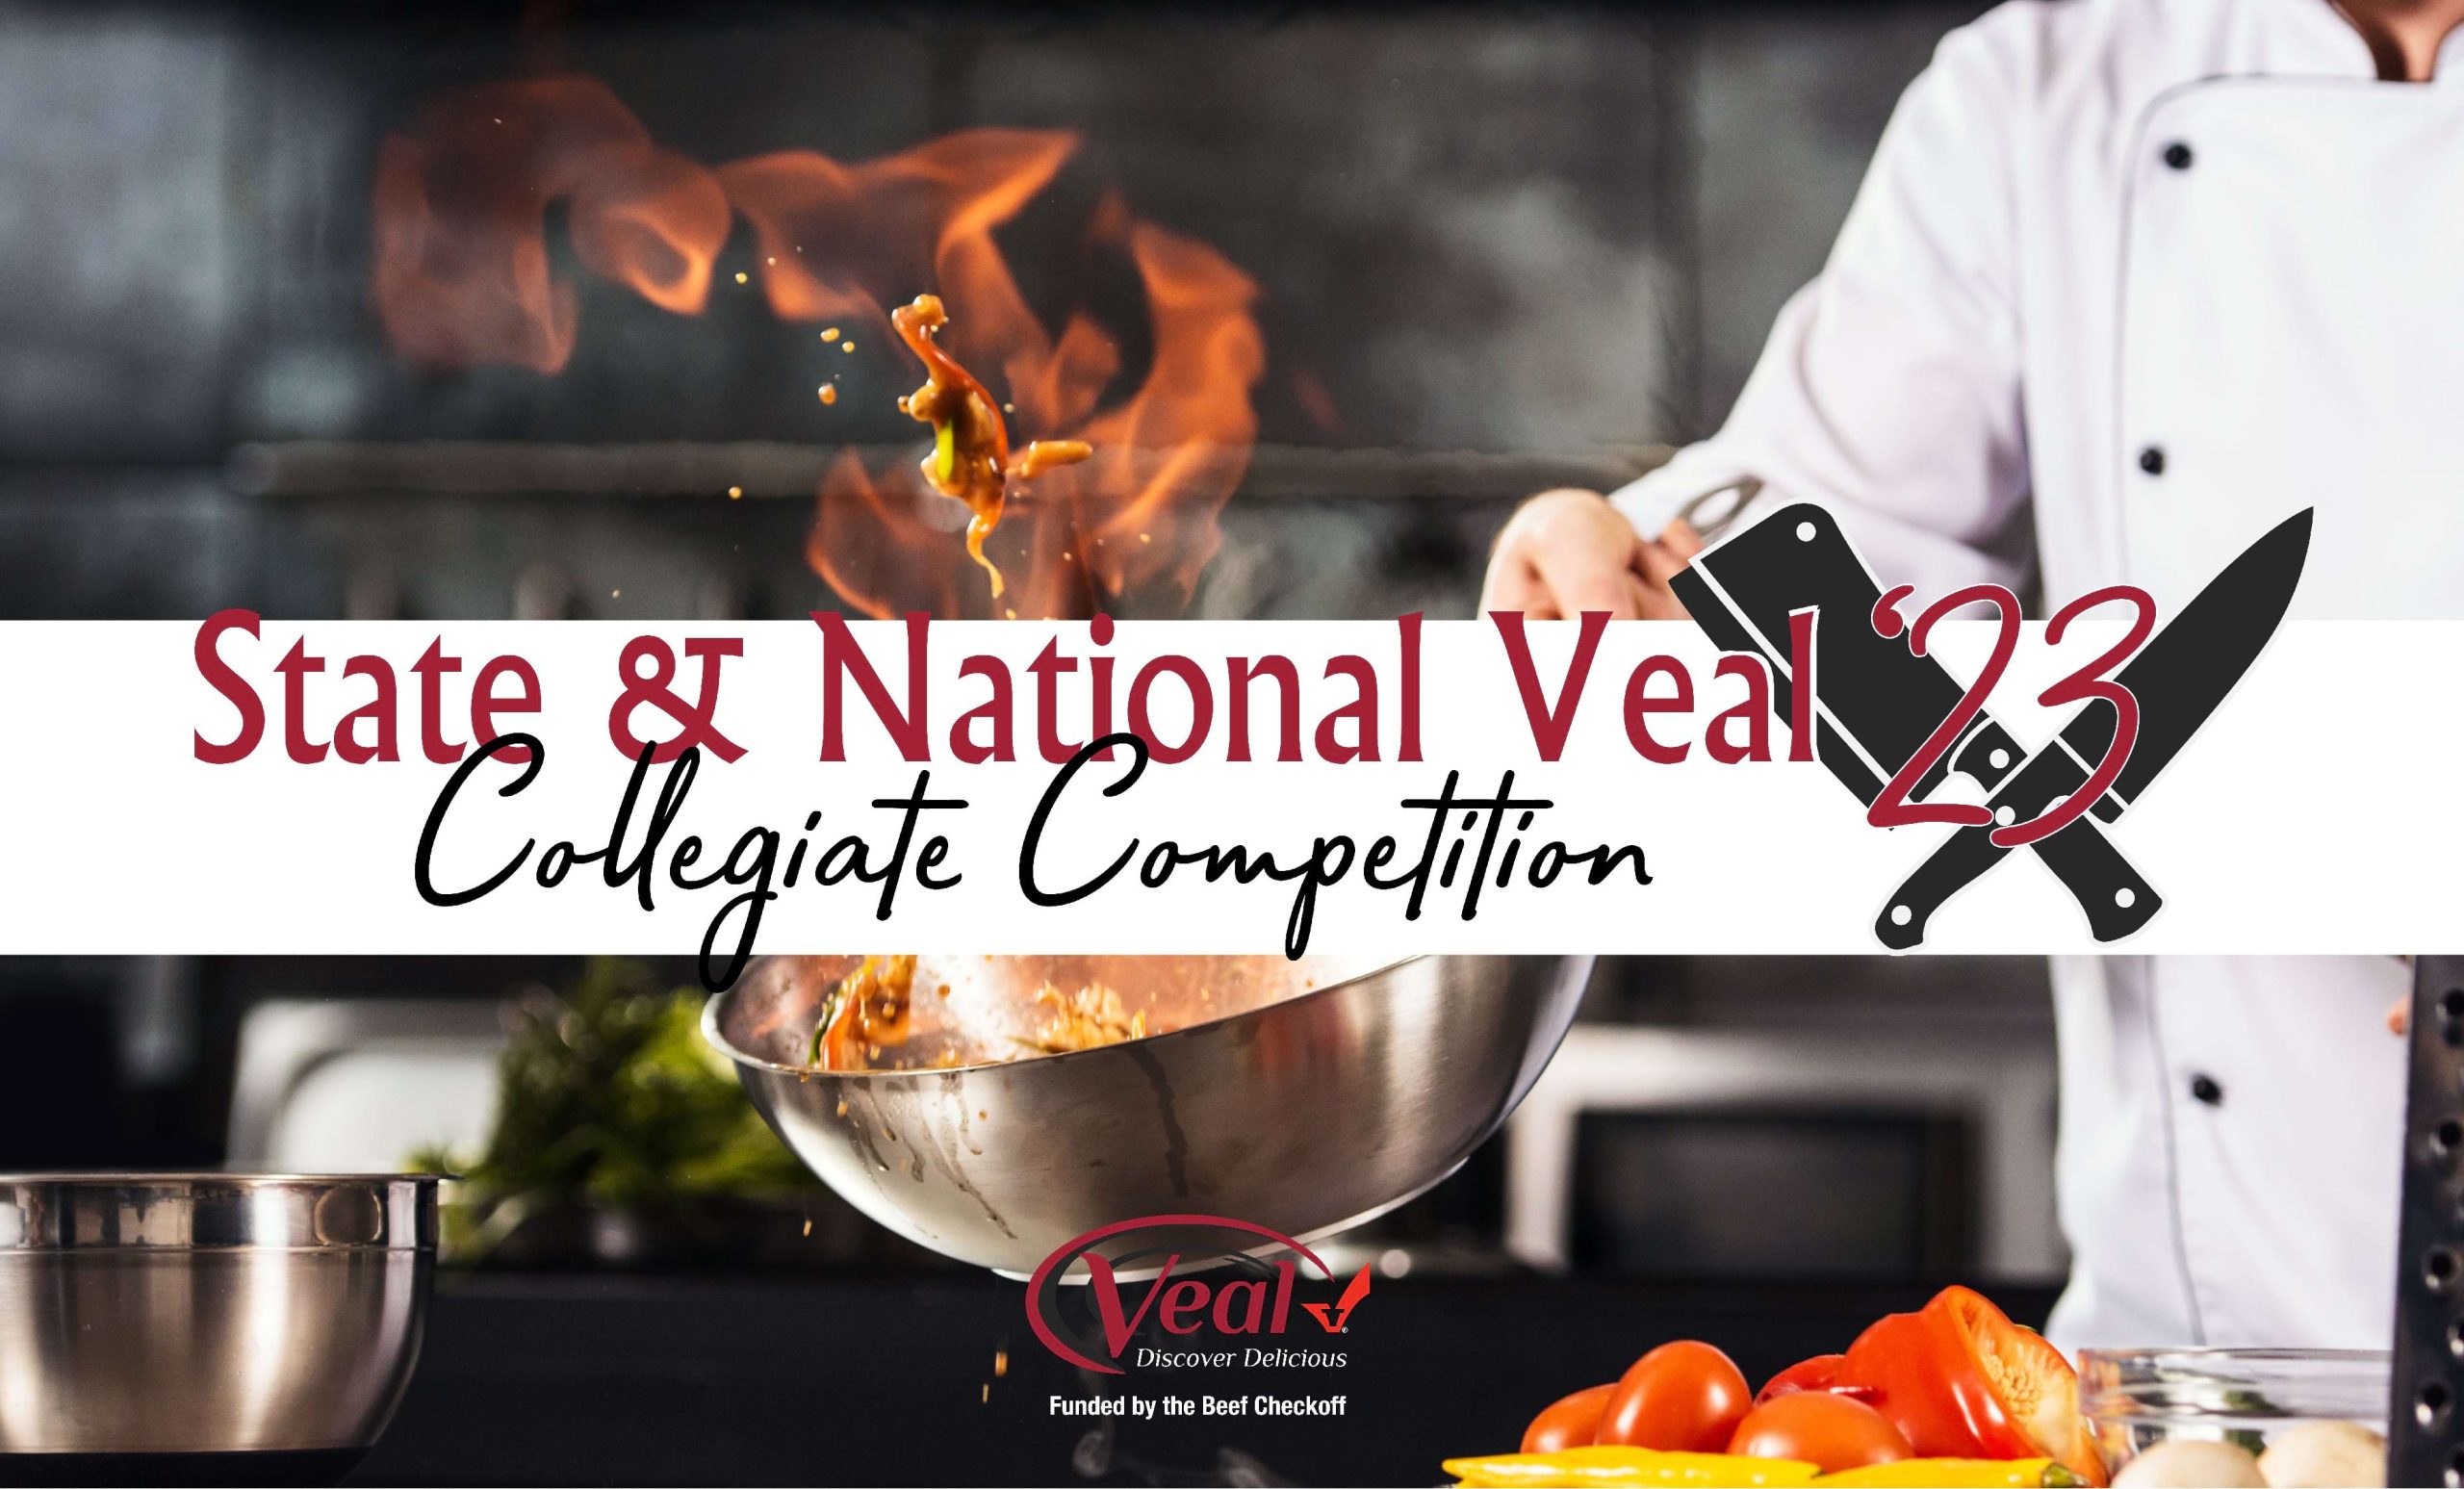 Chef cooking in the kitchen with fire, State and National Collegiate Competition logo over image '23